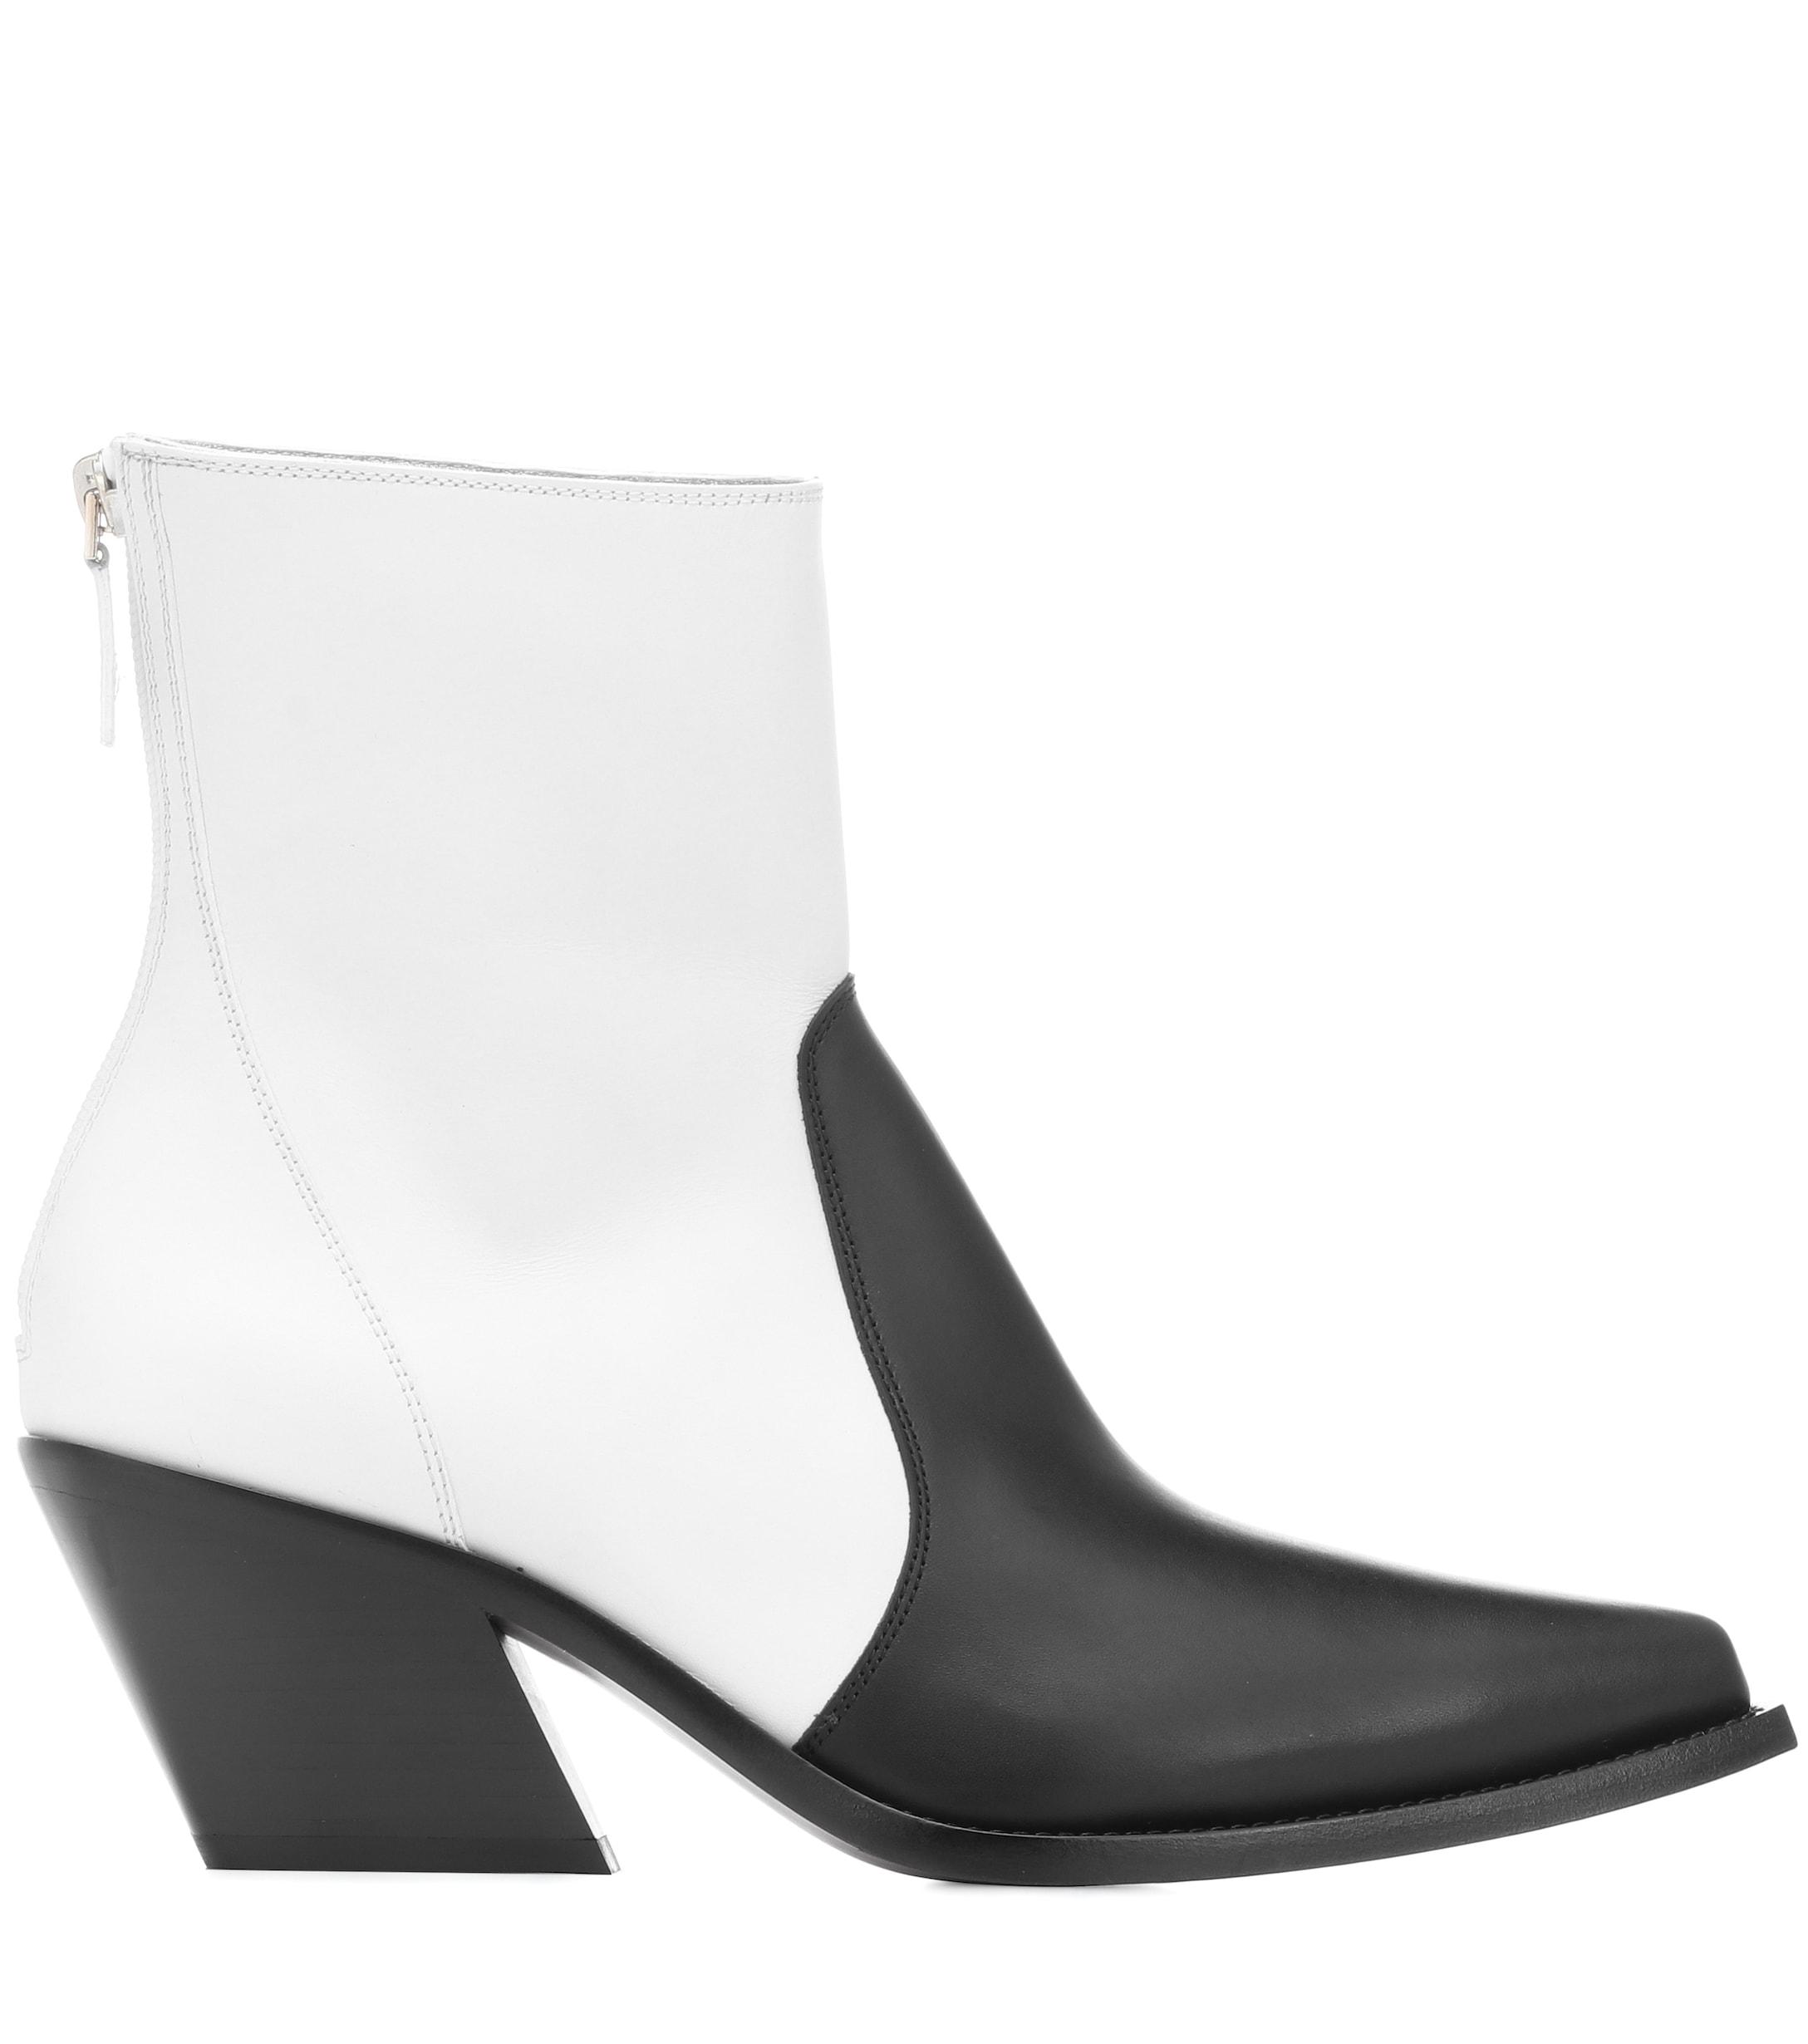 Givenchy Leather Cowboy Boots in Black - Lyst